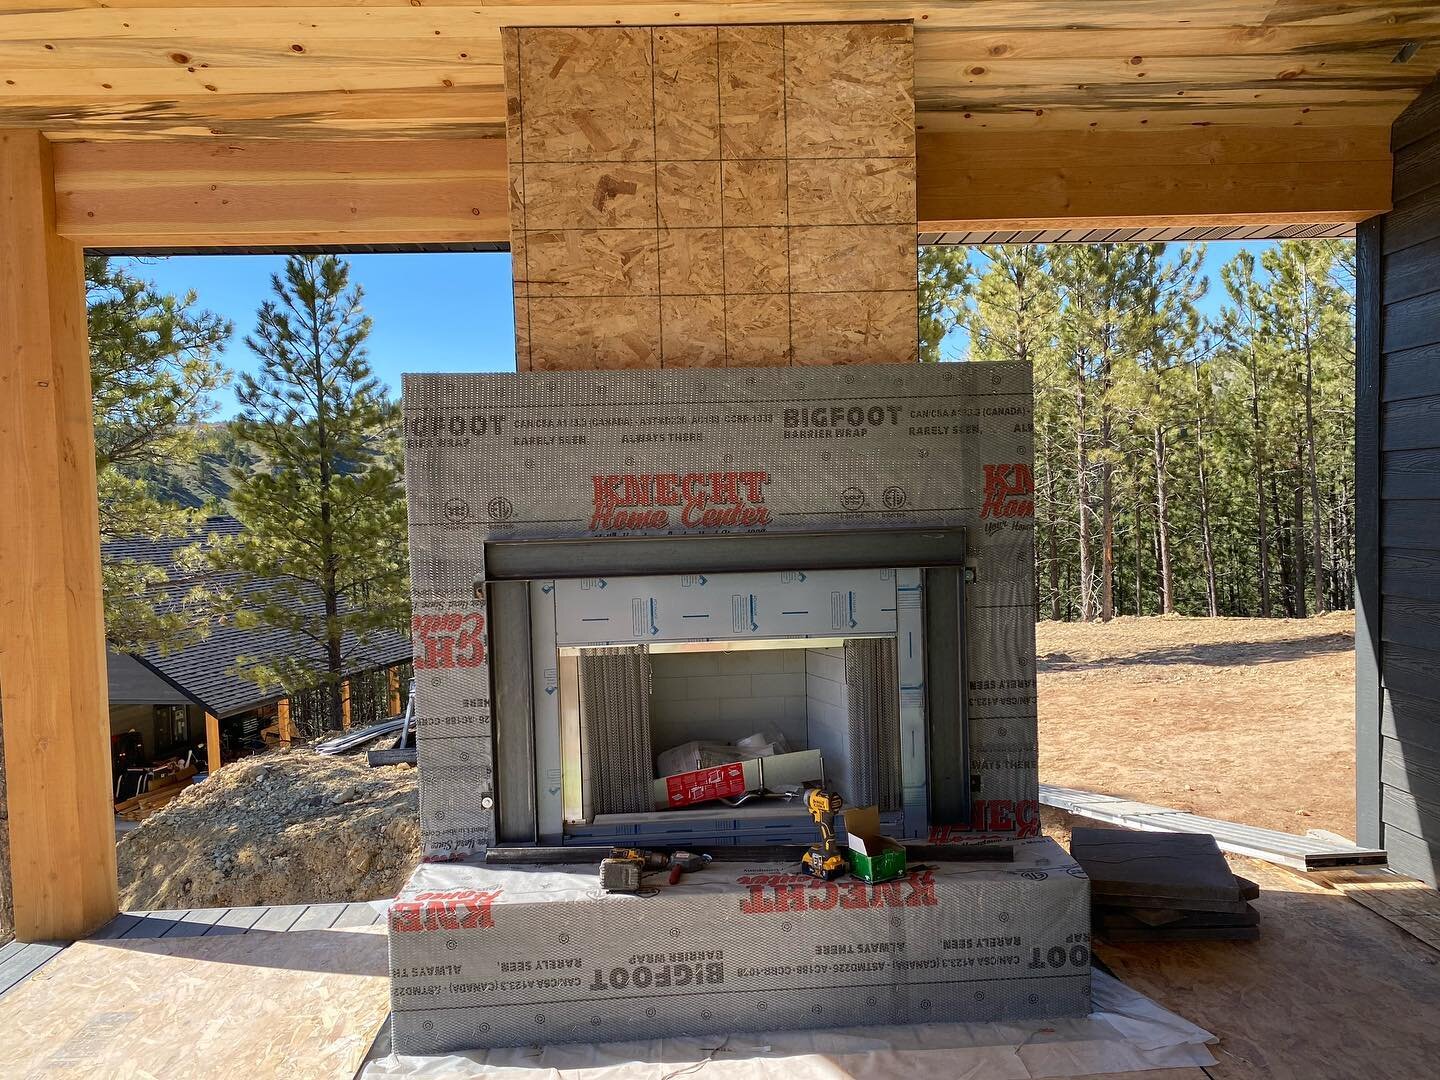 At the @fremontcustomhomes we&rsquo;re adding more metal features to the outdoor fireplace. Using 5&rdquo; channel iron to outline the fireplace. Then we will be adding metal to the top portion. Stay tuned for the completion of this project. Contact 